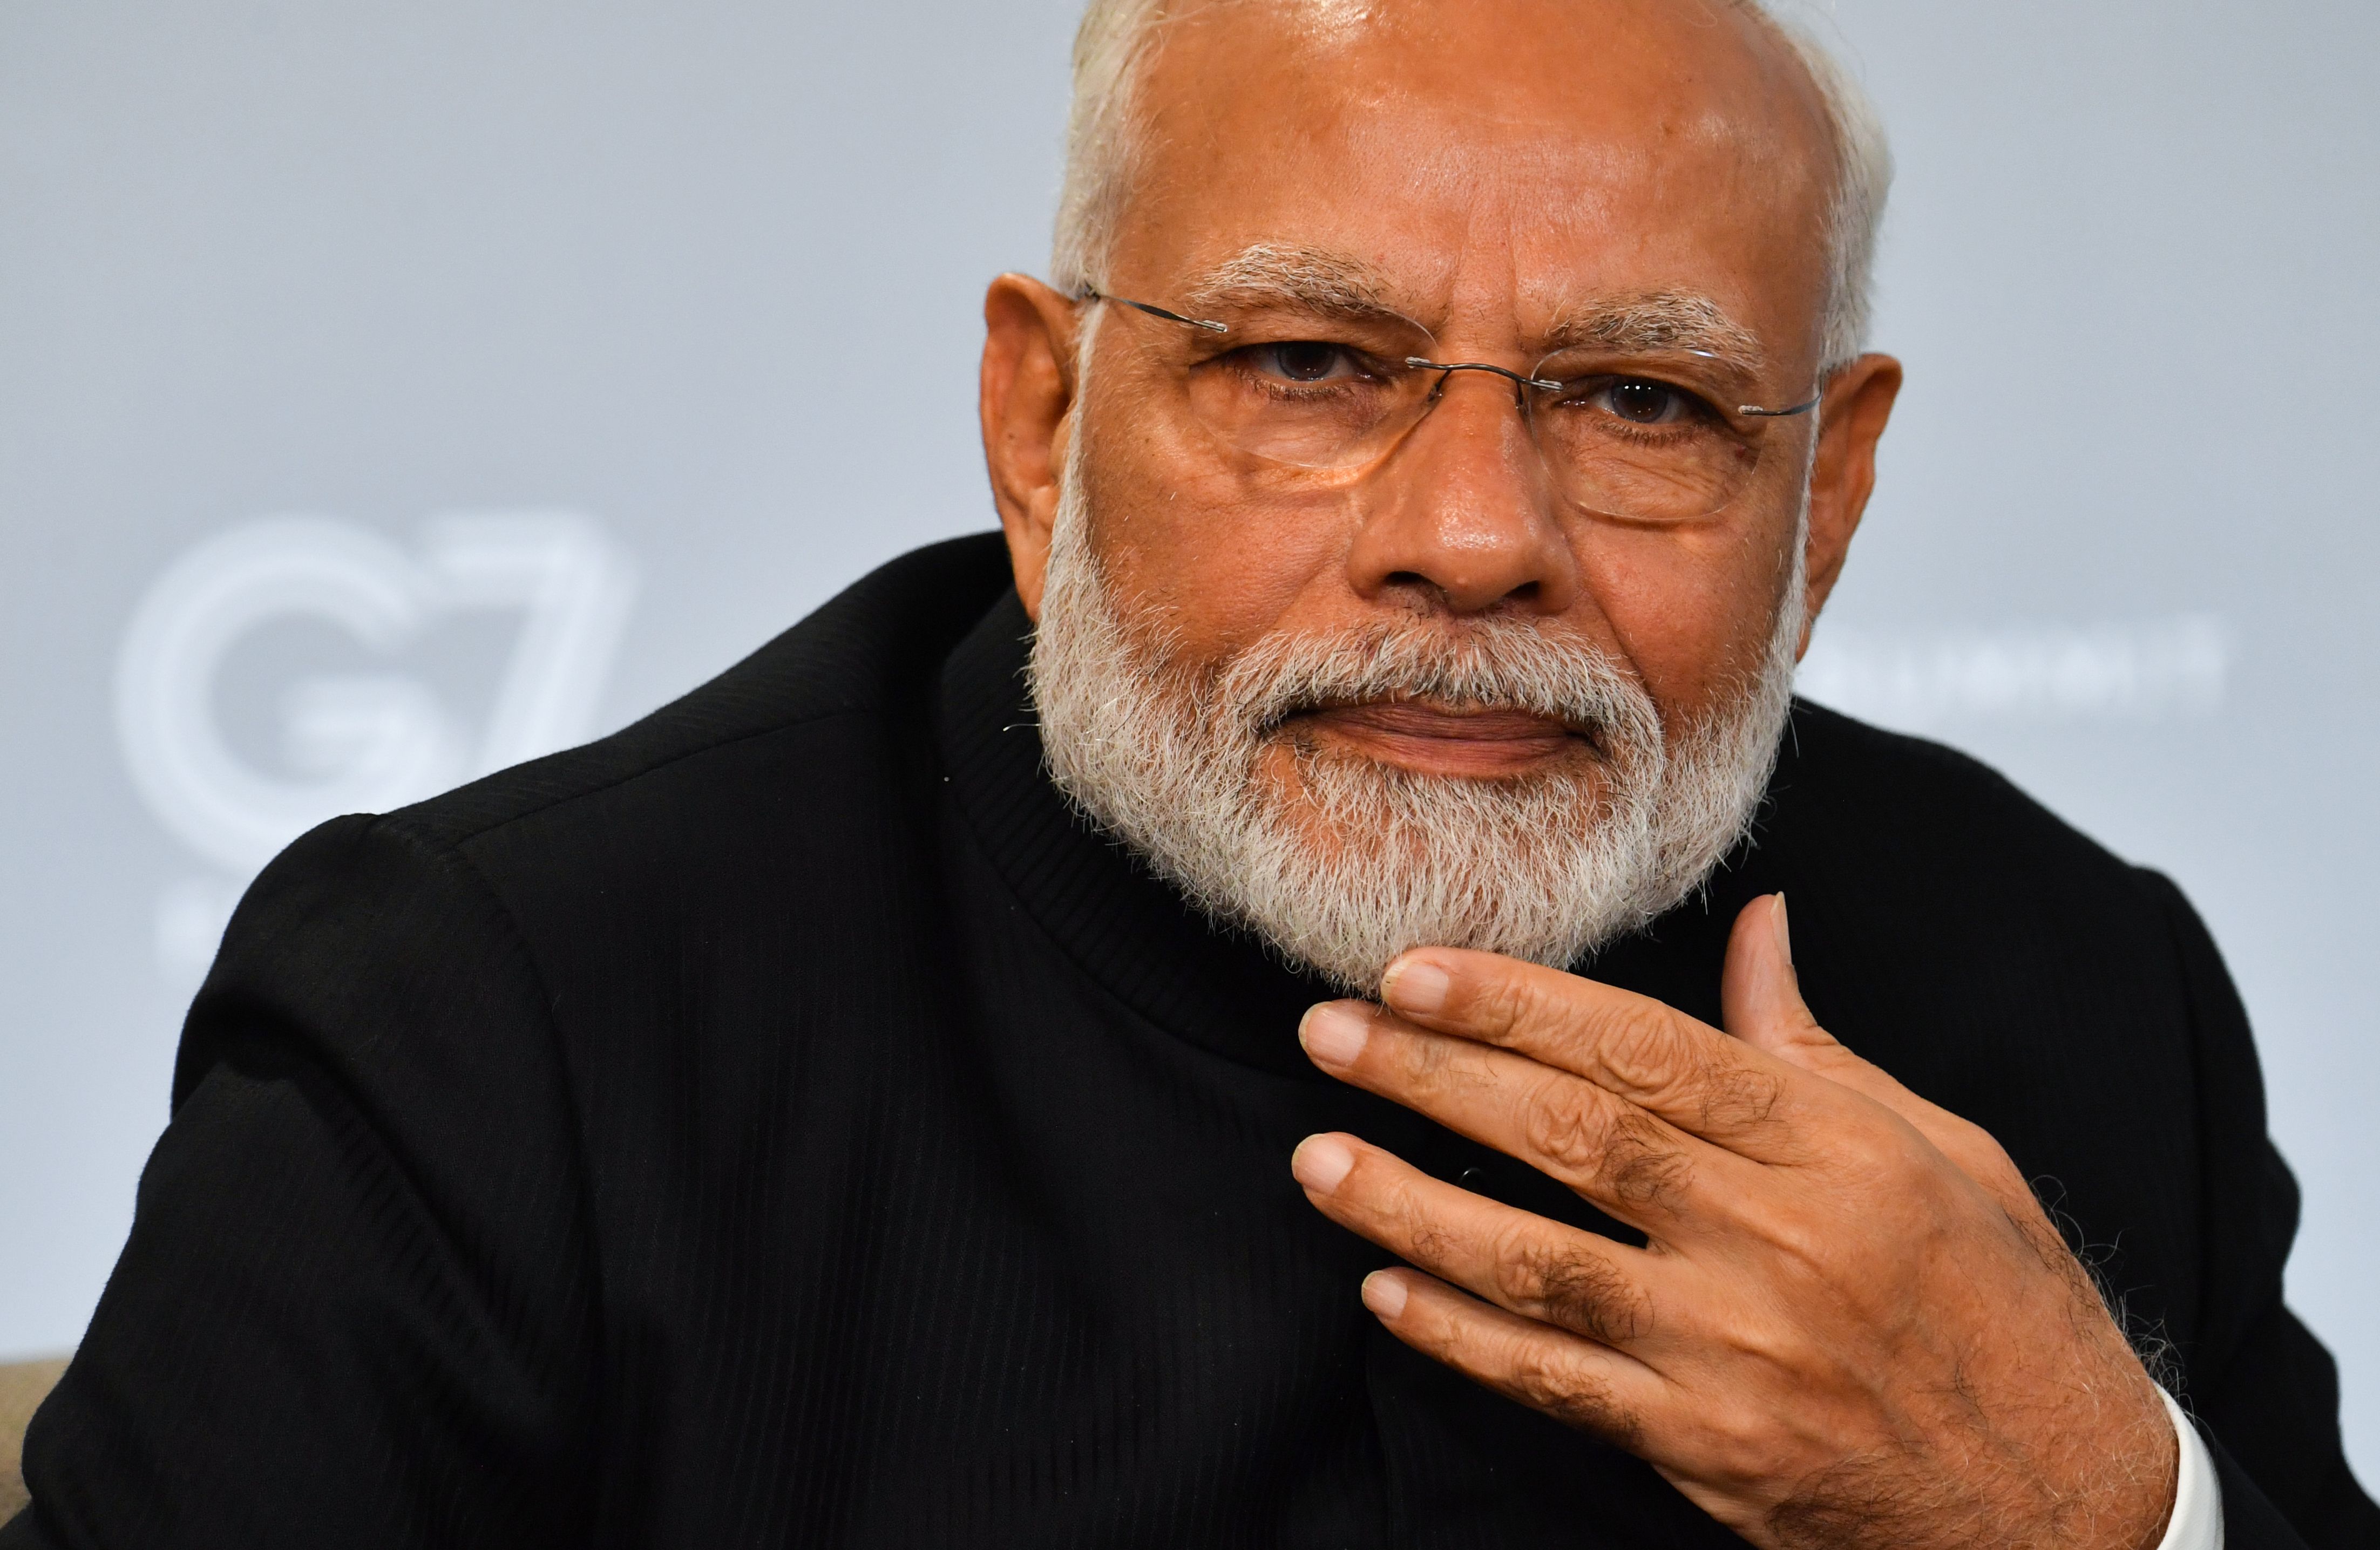 Modi Uses Another International Visit to Raise His Local Profile - WSJ